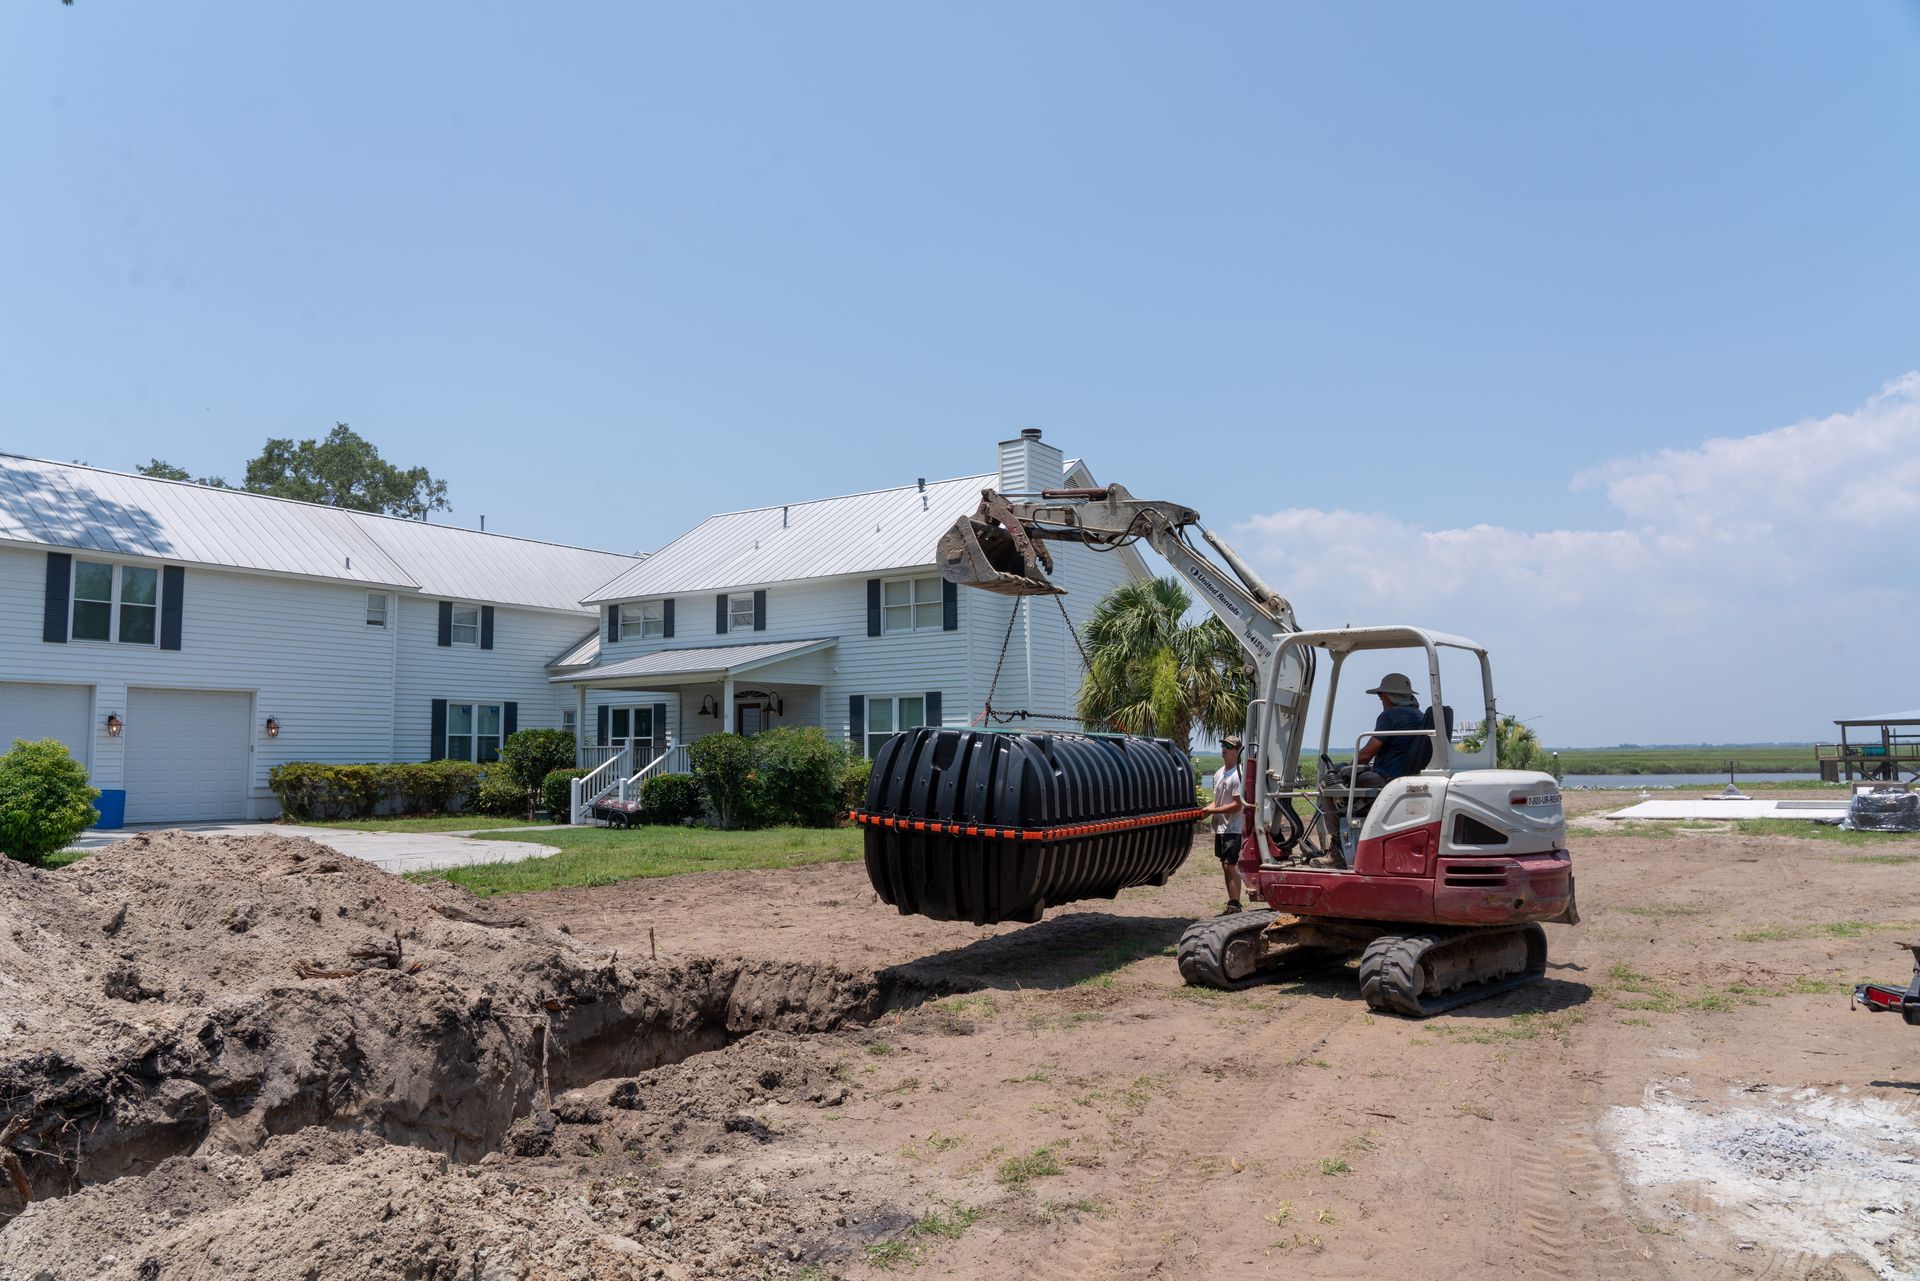 an excavator is carrying a large tank in front of a house